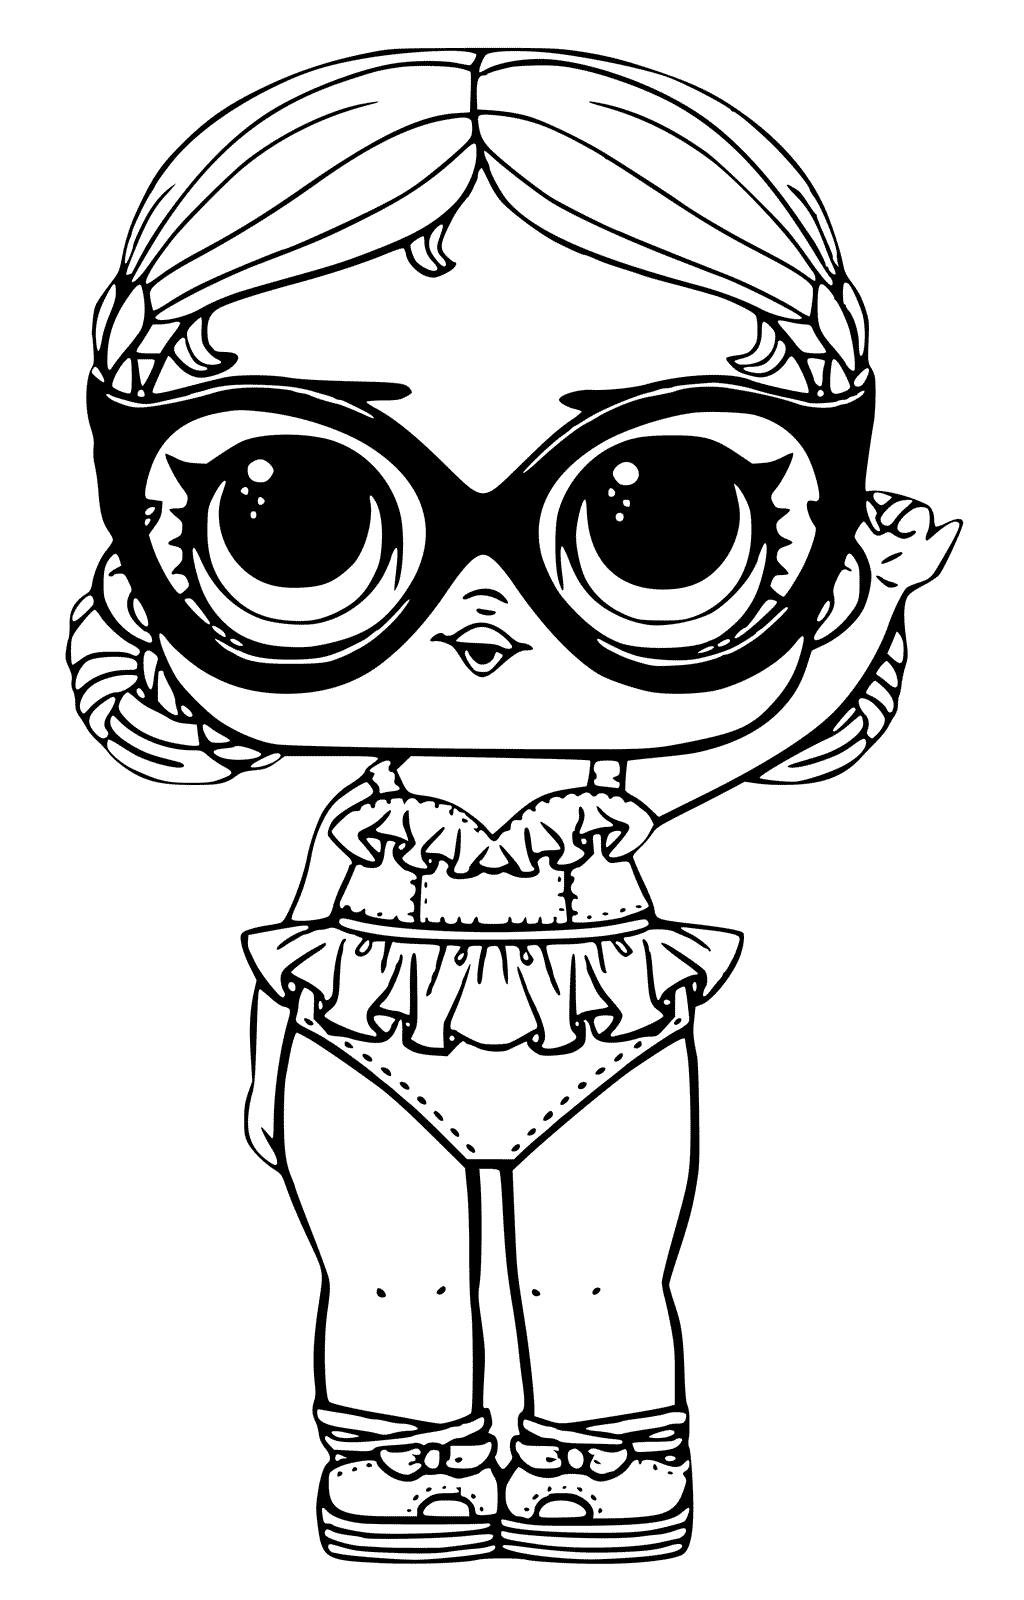 40-free-printable-lol-surprise-dolls-coloring-pages